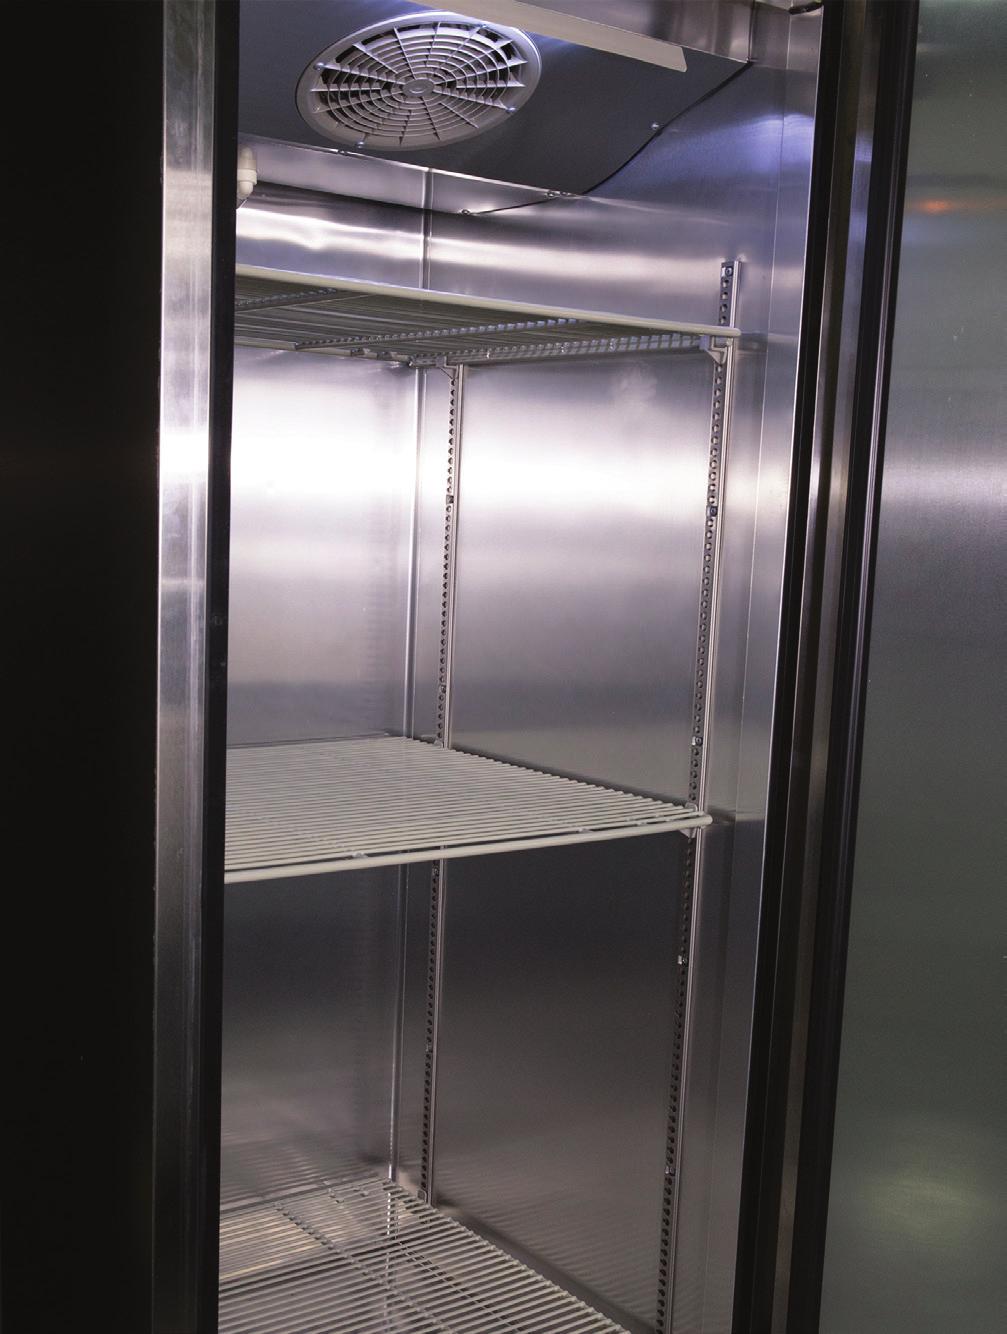 High-density, CFC-free polyurethane insulation in the cabinet and doors promote superior temperature uniformity.